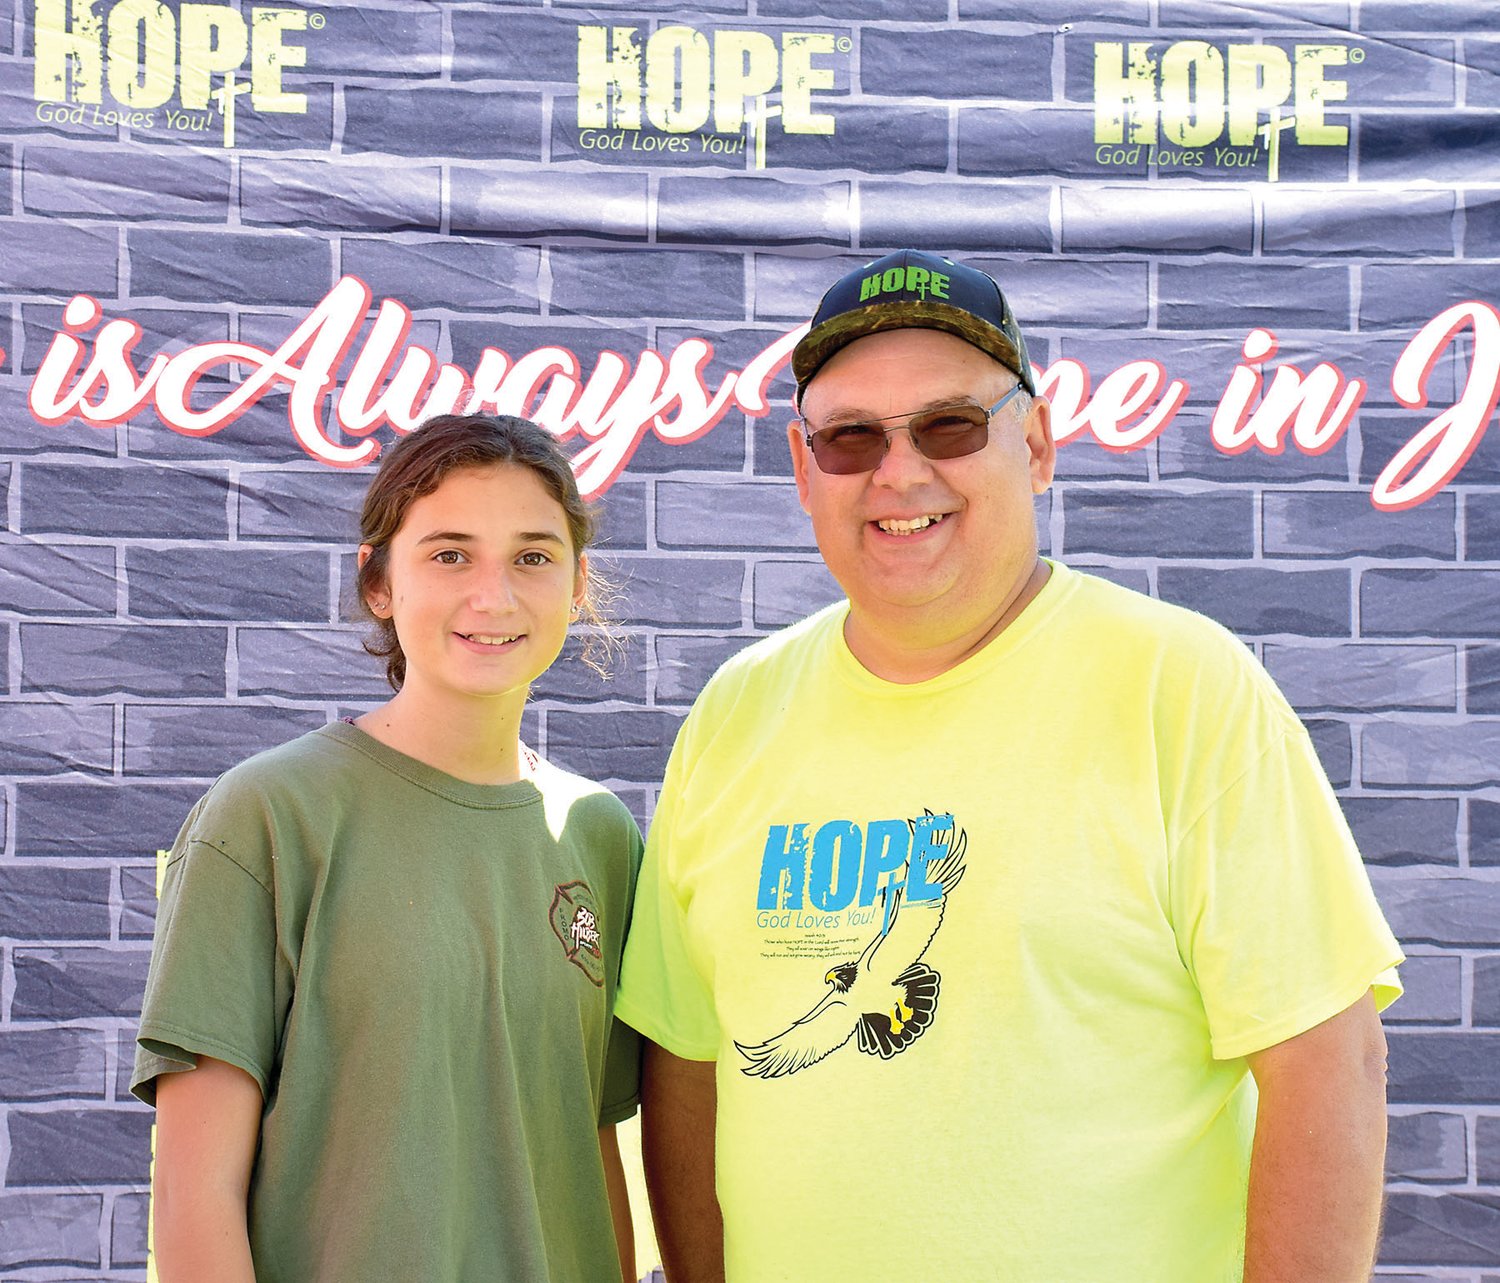 Brad Edenfield of Executive Promotions and his daughter, Rachel, overseeing Sweatshirt of Hope.